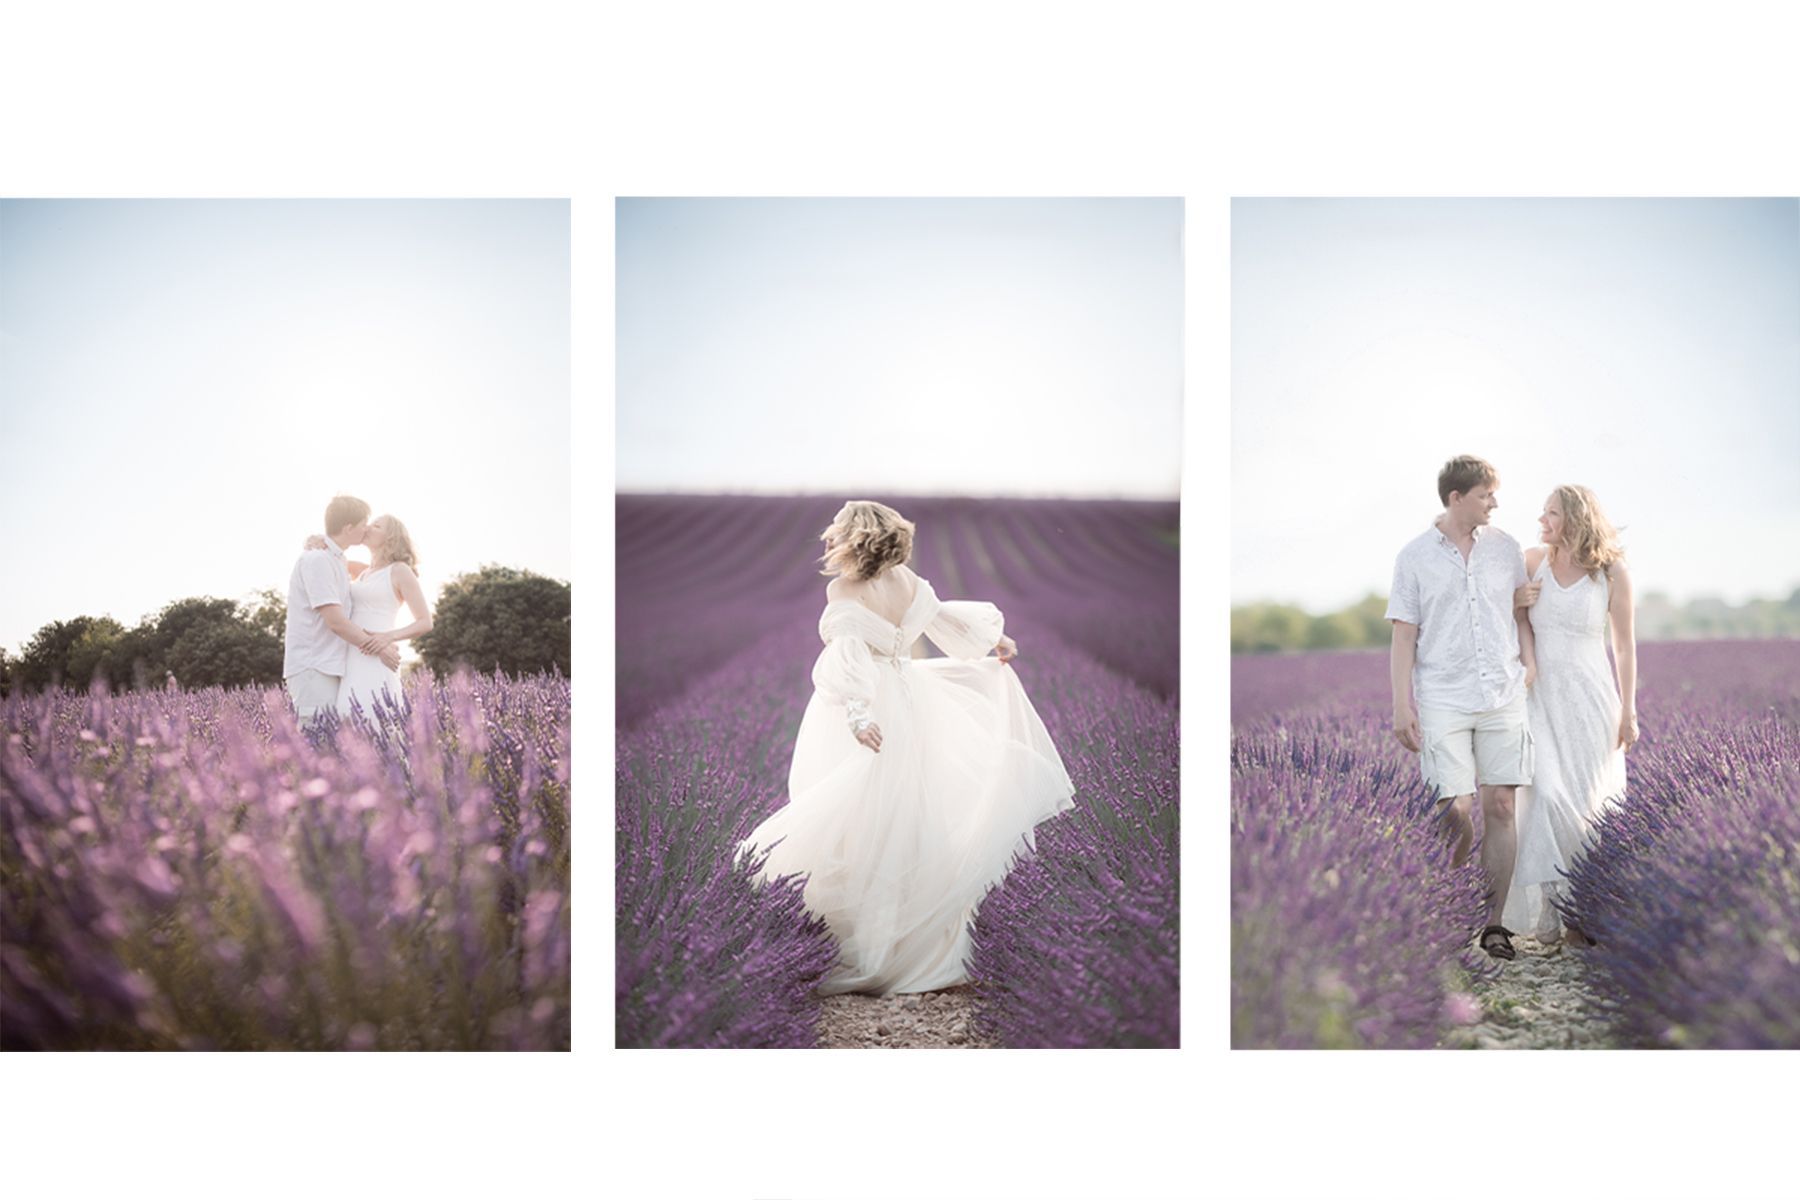 A romantic couple stroll through a famous lavender field in Valensole, Provence